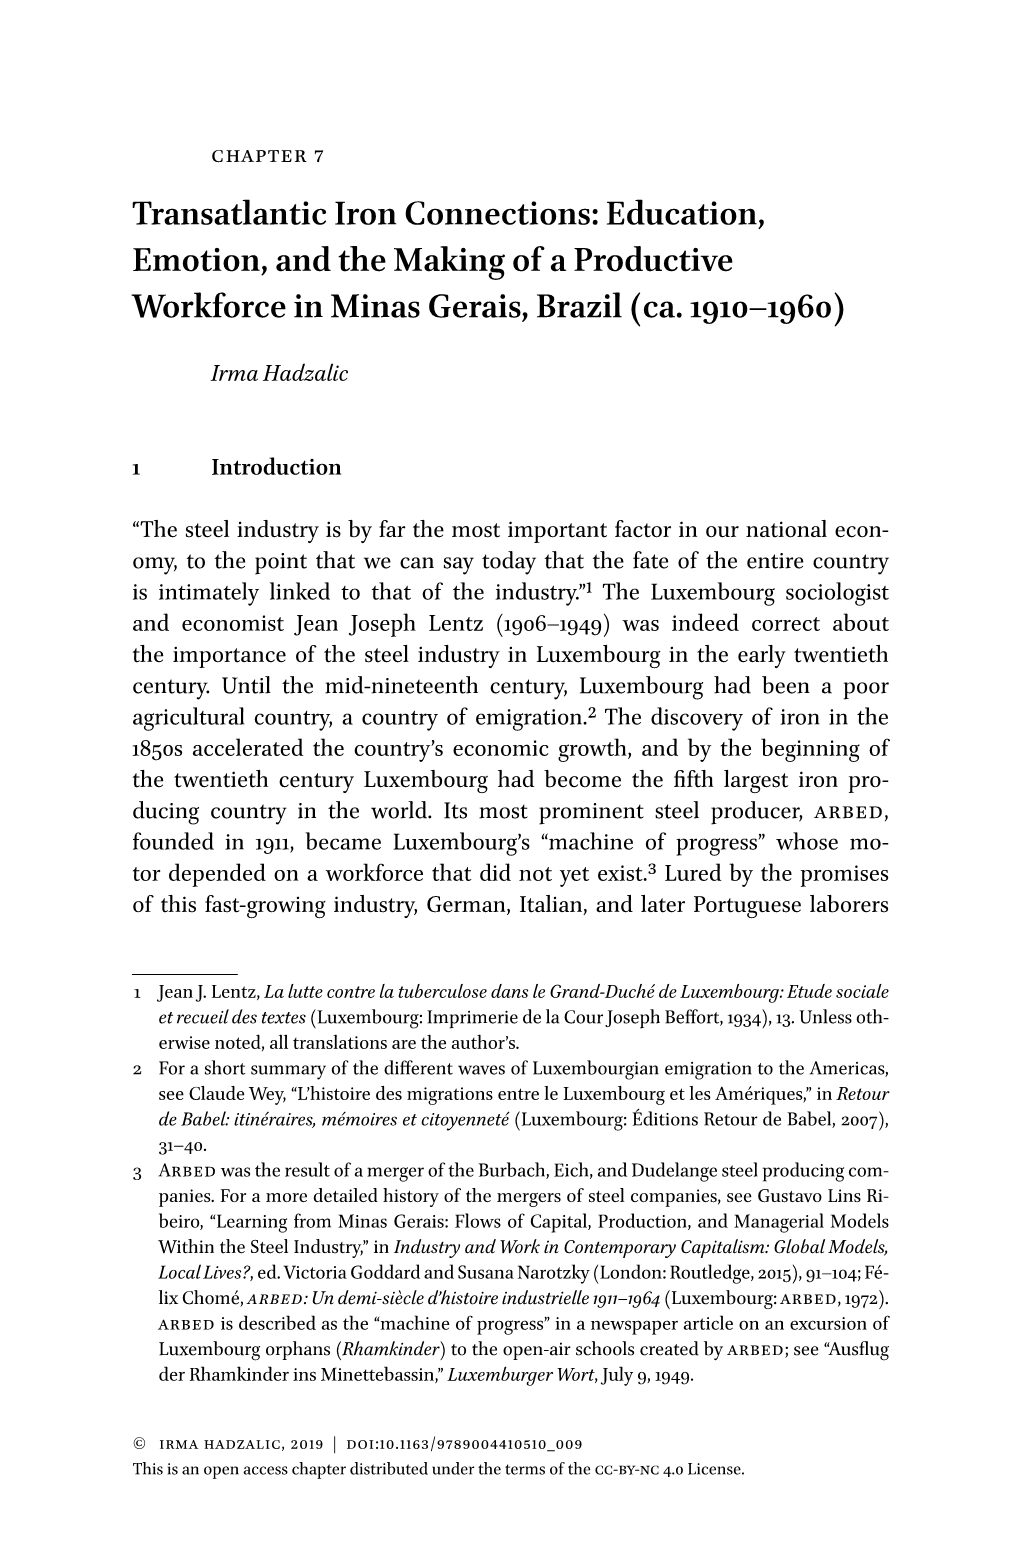 Education, Emotion, and the Making of a Productive Workforce in Minas Gerais, Brazil (Ca